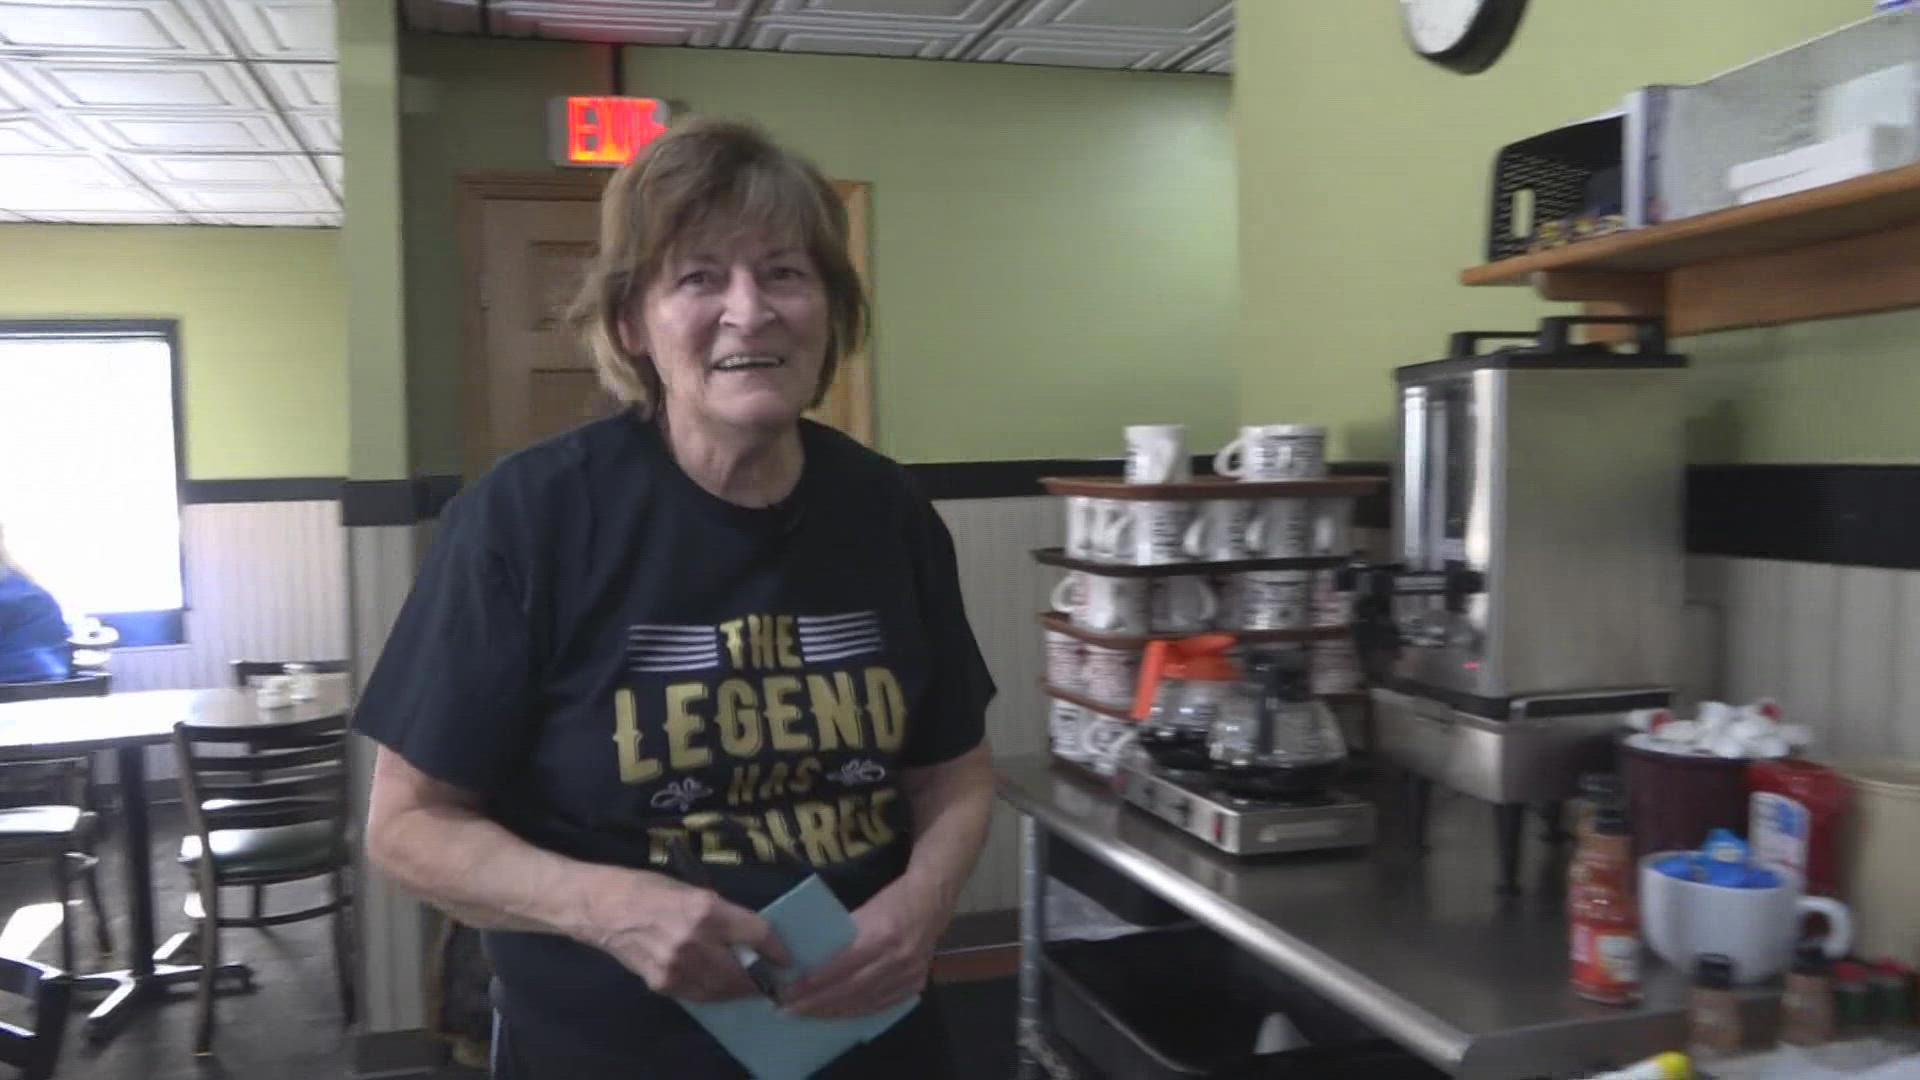 Dorla West has been a crowd favorite at the restaurant since 1978.